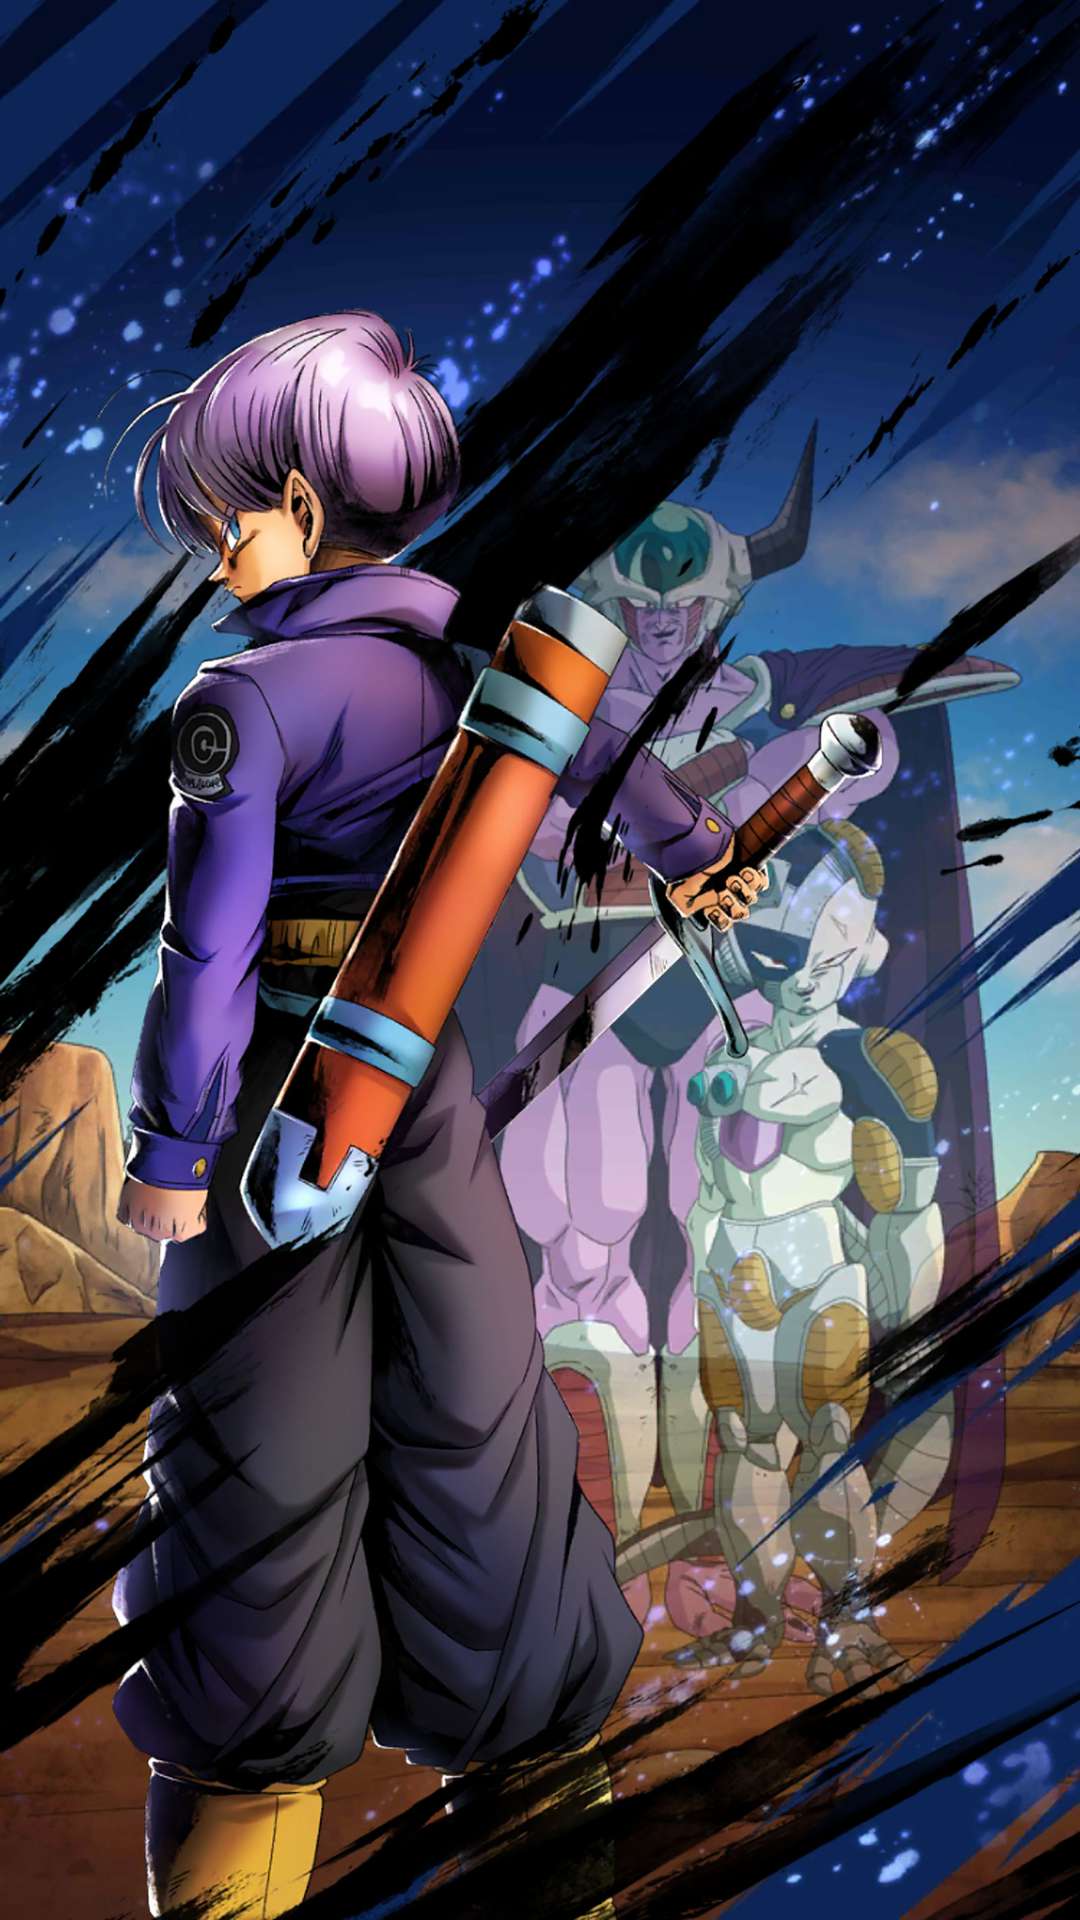 Trunks HD Anime 4k Wallpapers Images Backgrounds Photos and Pictures